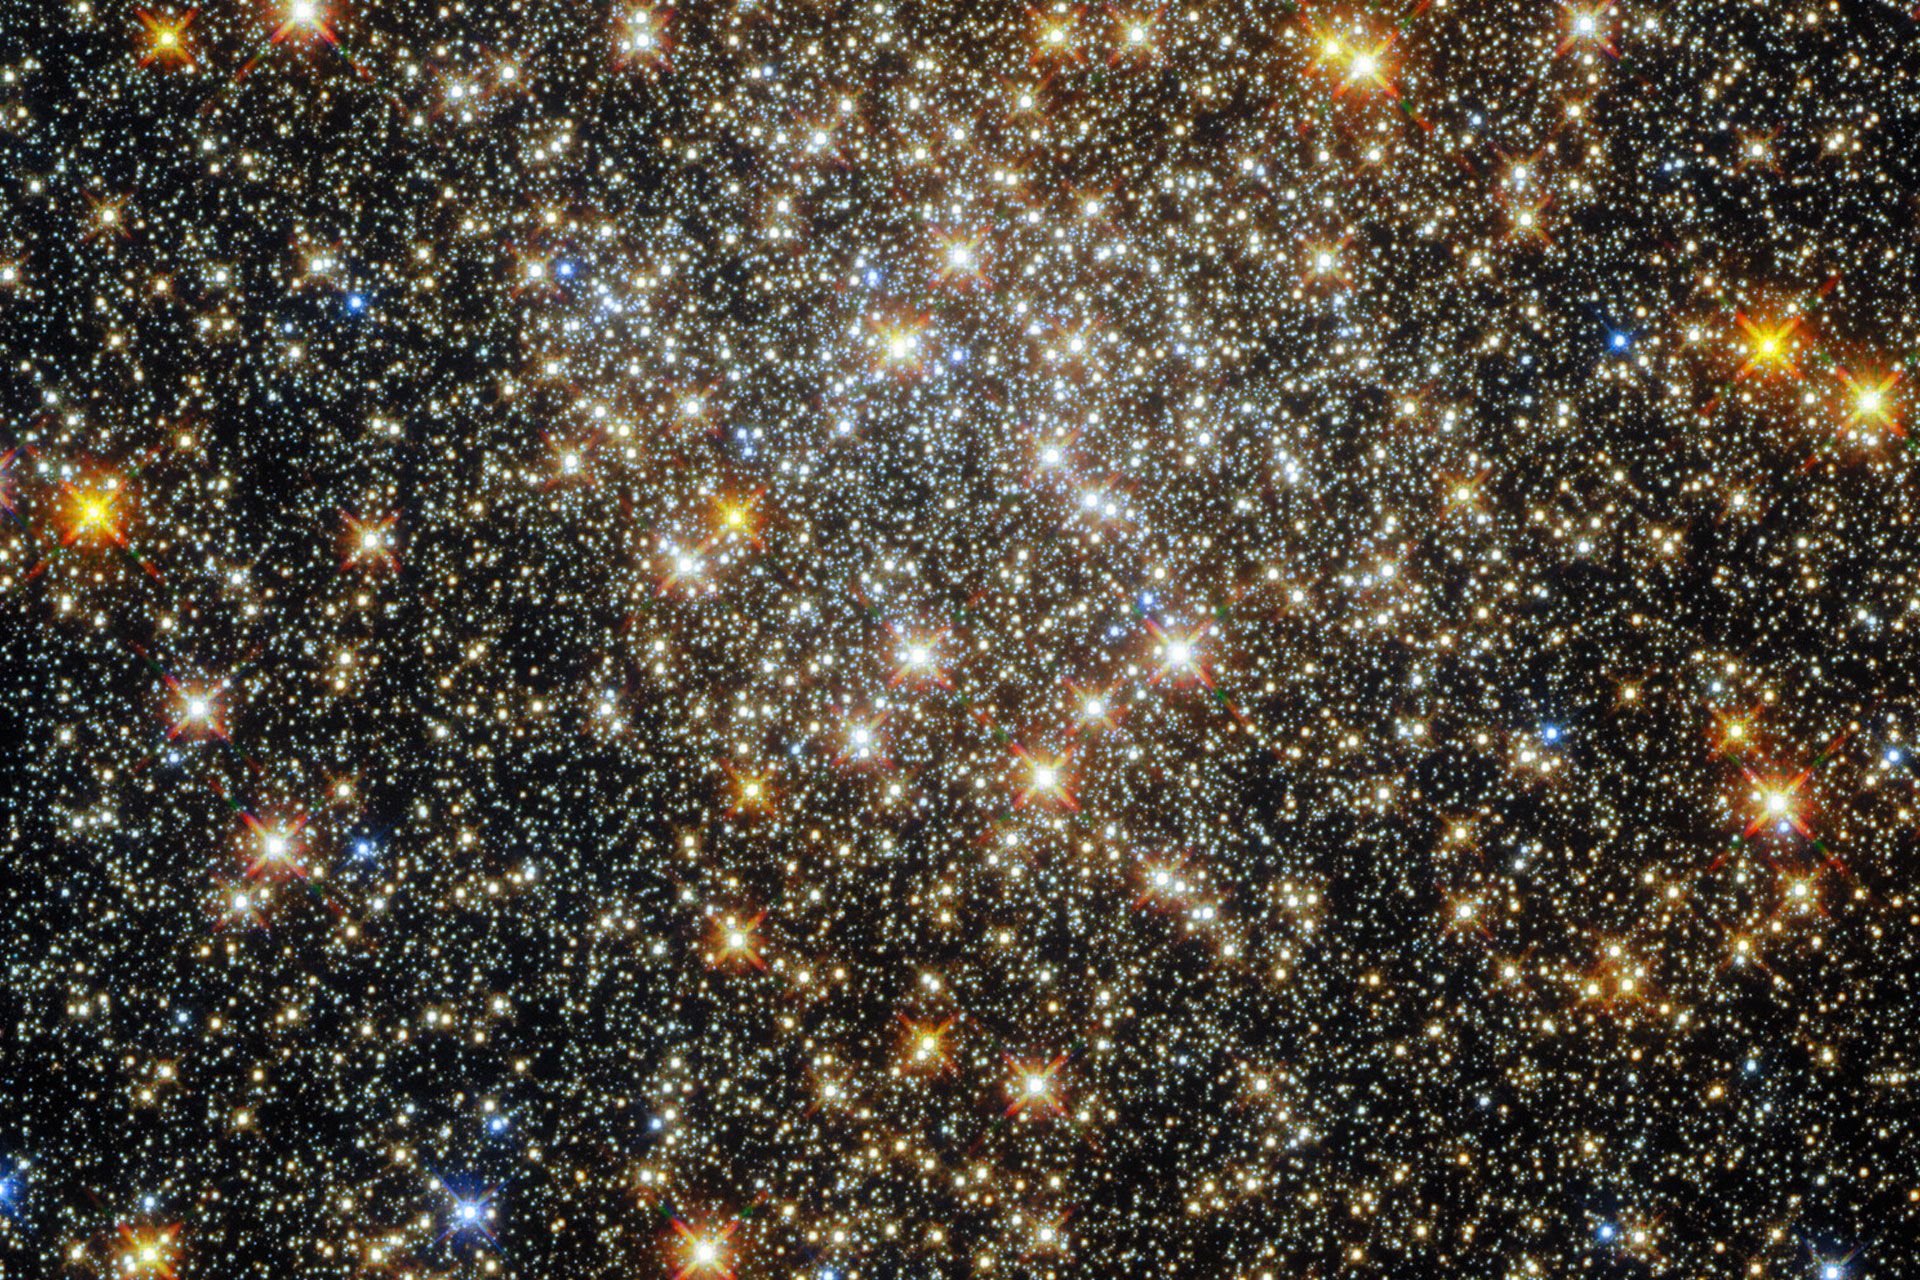 Image captured by Hubble of a star cluster at the heart of the Milky Way